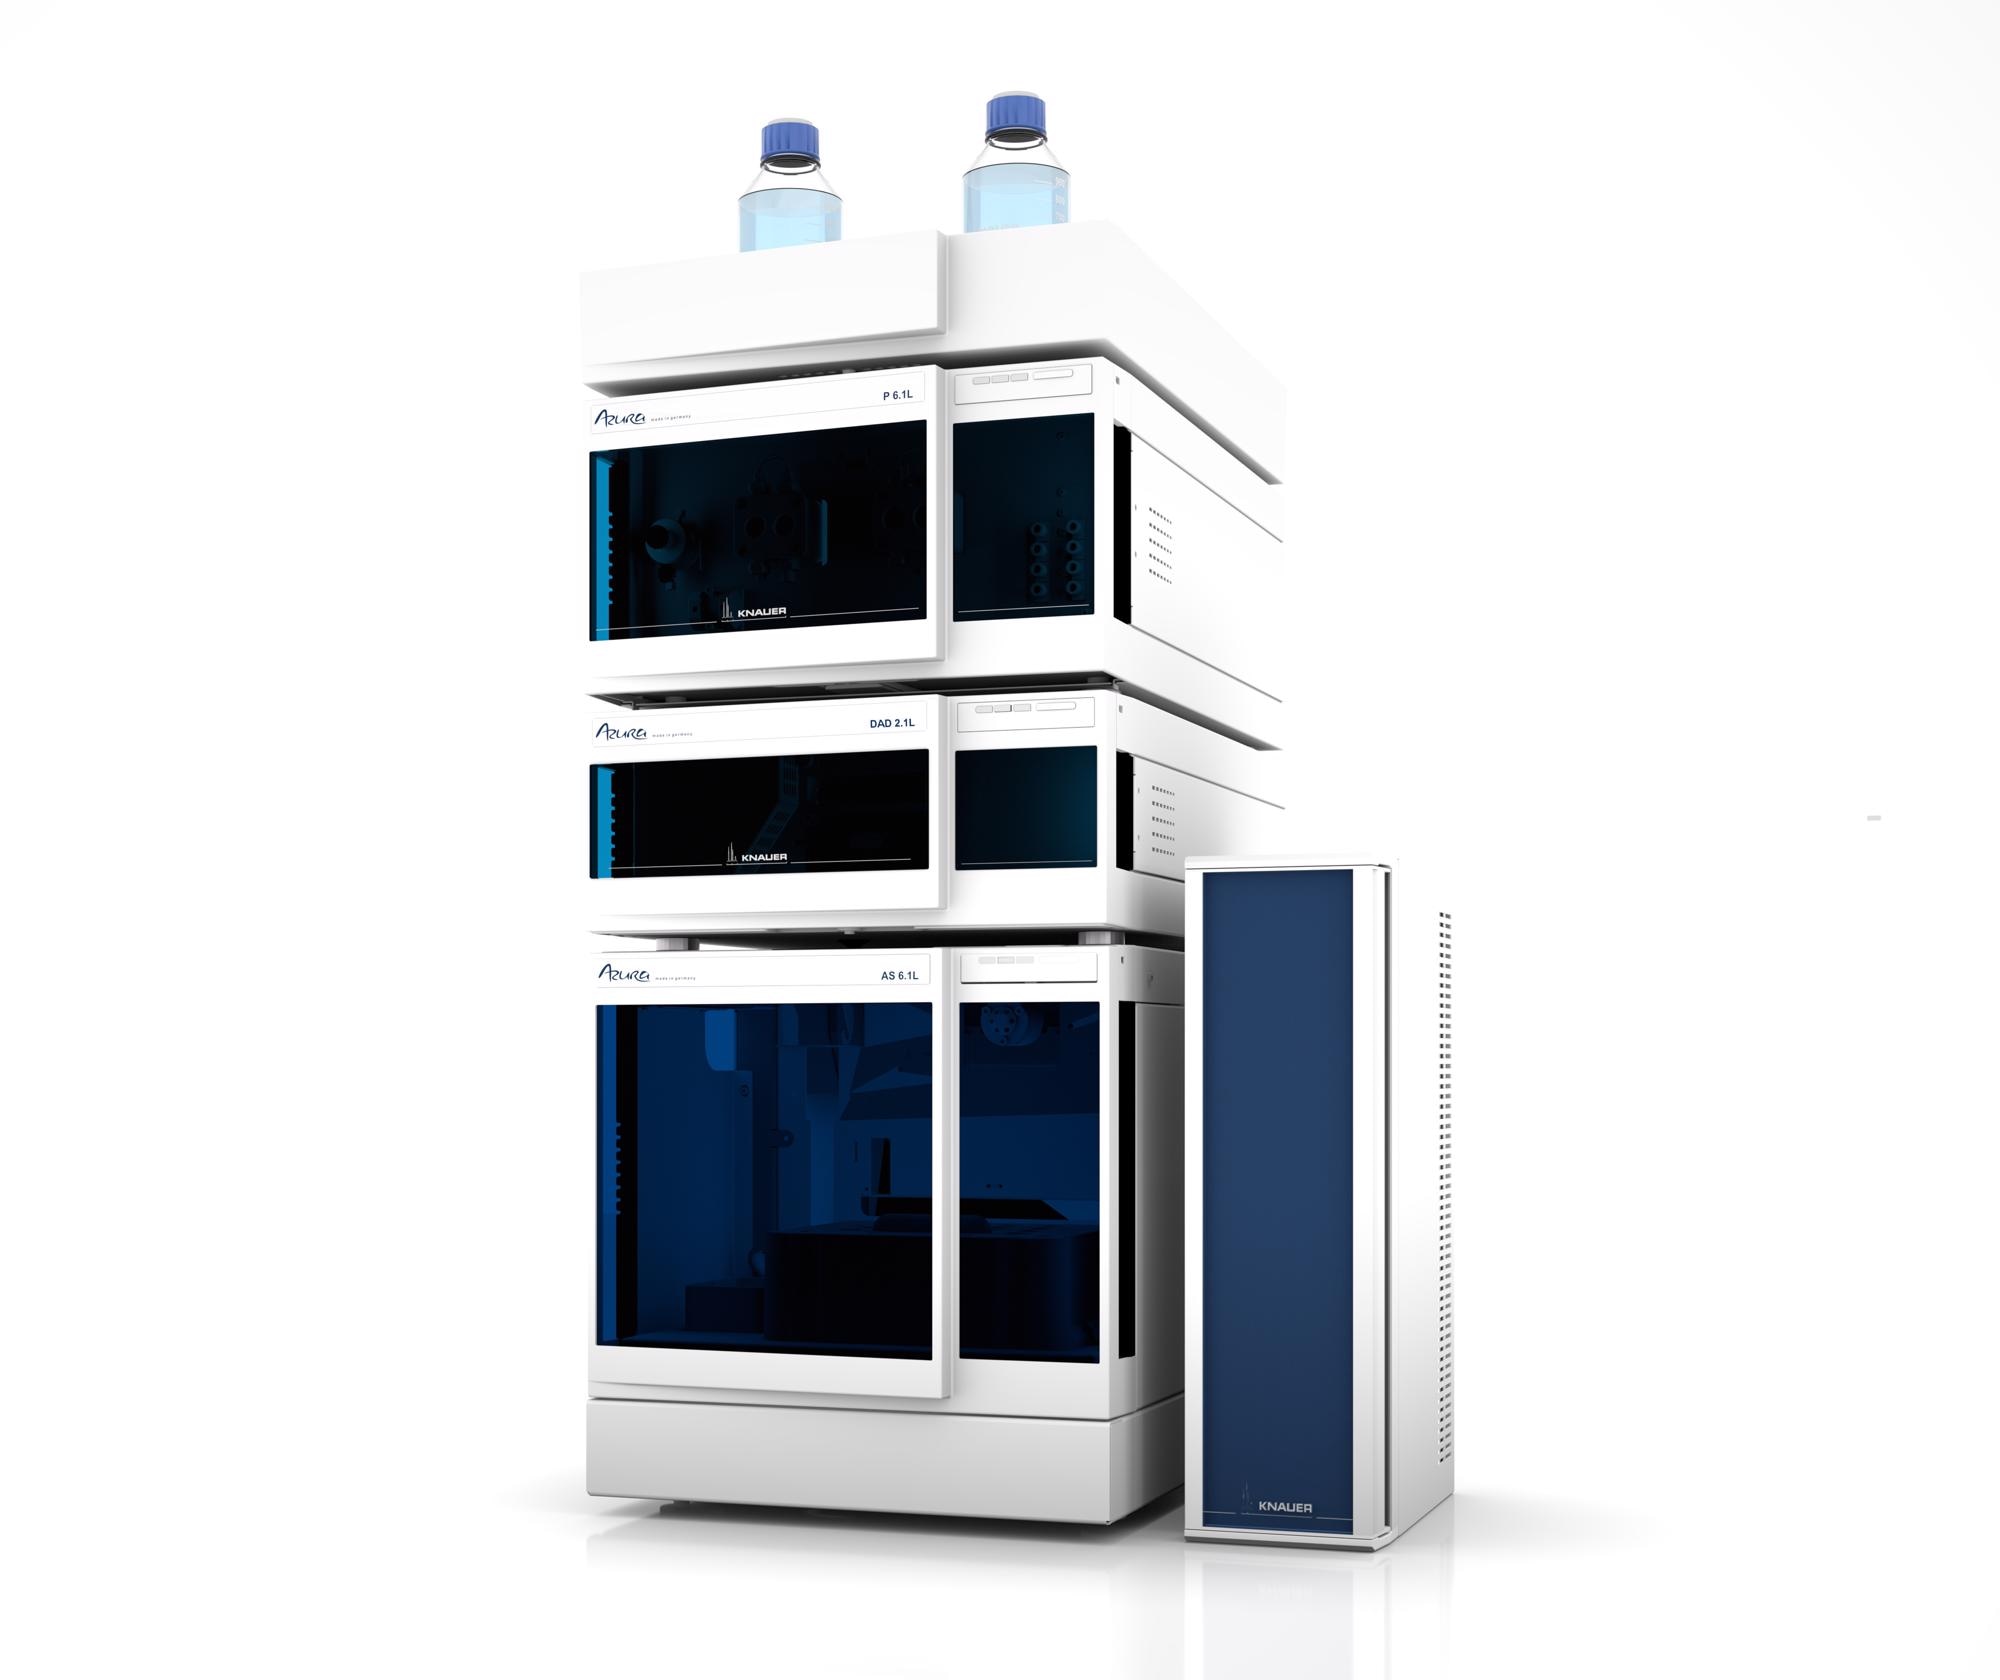 The complete AZURA HPLC system from KNAUER